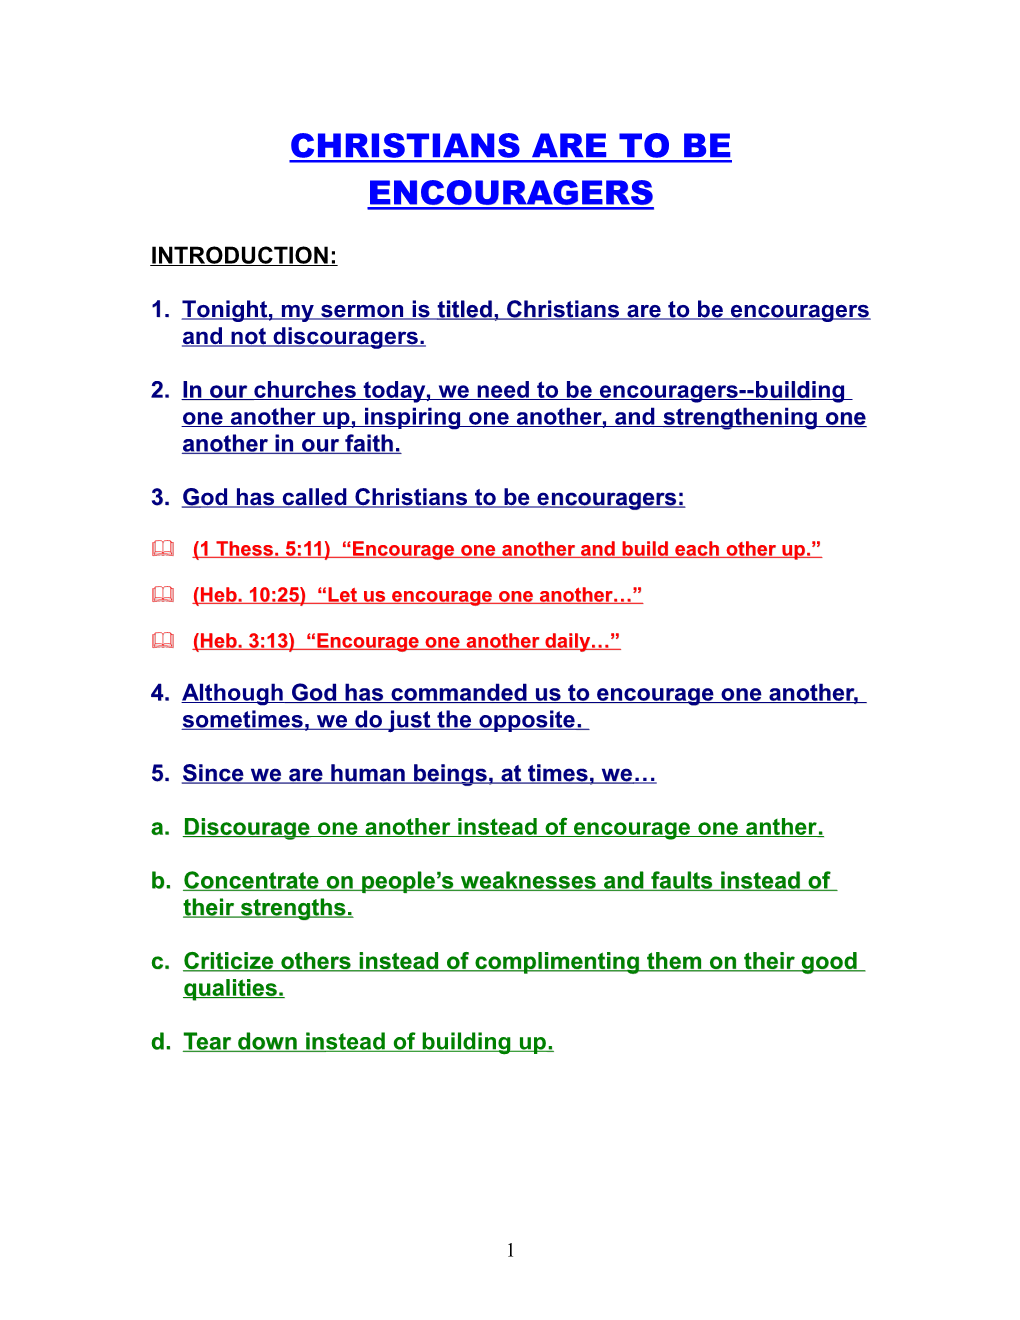 Christian Are to Be Encouragers